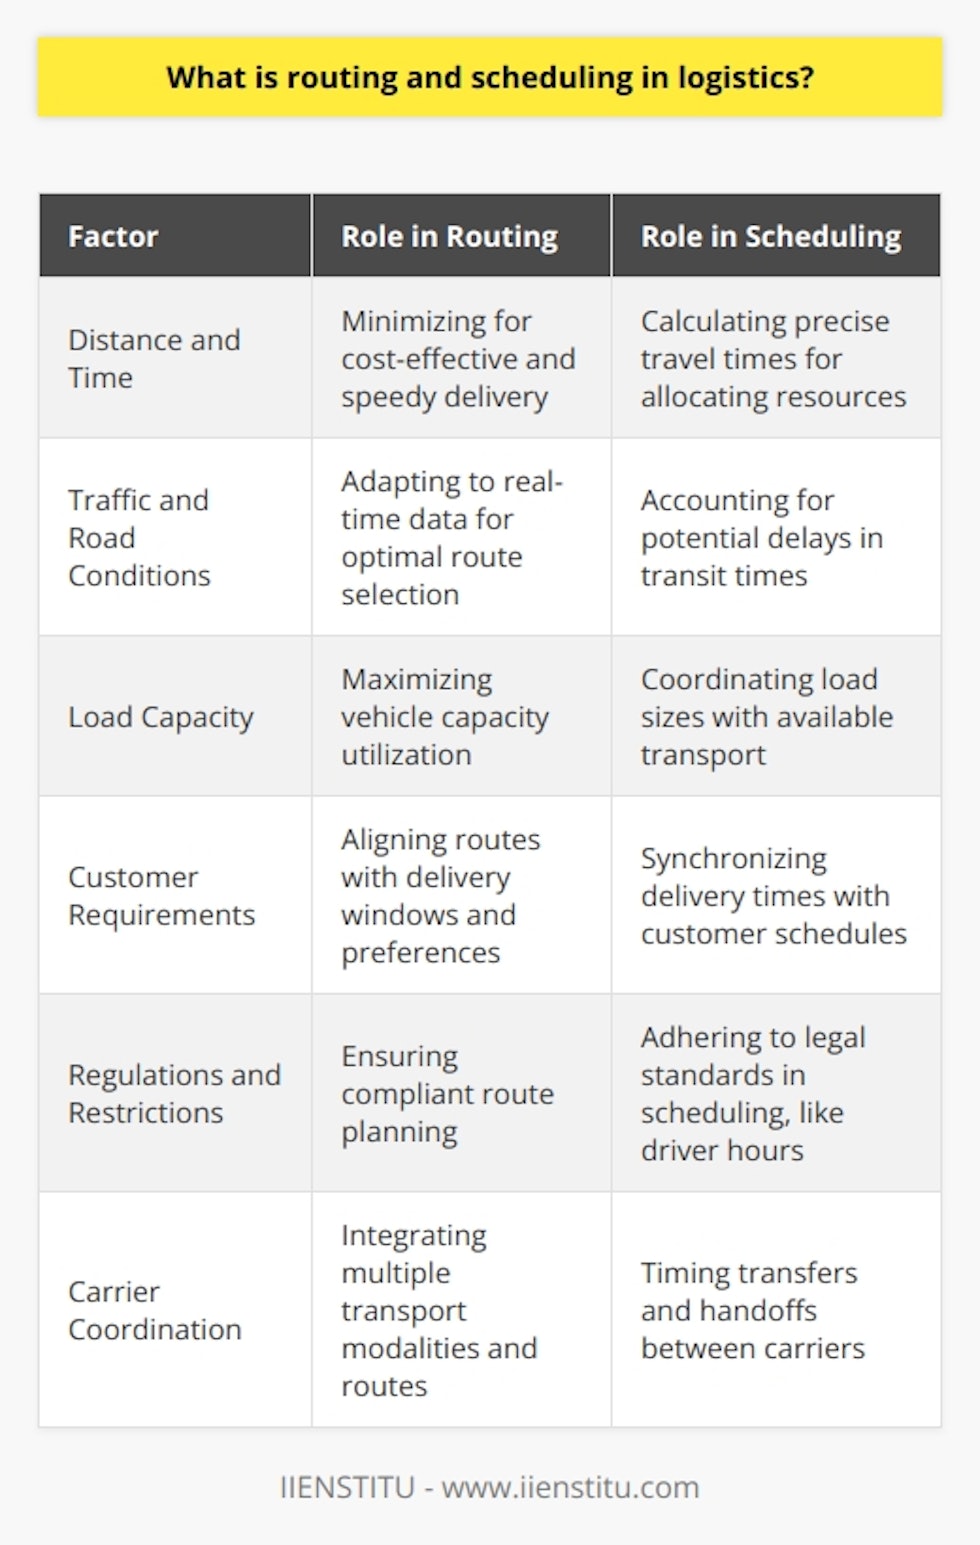 Routing and scheduling in logistics are cornerstones of effective supply chain management, enabling companies to deliver products efficiently, while optimizing costs and resources.Routing in logistics comprises the strategic planning of the most effective pathways that goods must take from their source to their final destination. The primary goal of routing is to achieve the fastest, safest, and most cost-effective delivery of shipments. Complicated algorithms are used to process a multitude of variables, including but not limited to geographic distance, road quality, prevailing traffic patterns, and regulatory transportation guidelines. These algorithms grow ever more sophisticated as technology incorporates real-time data into routing decisions, allowing for dynamic re-routing to avoid unexpected delays like traffic jams or road closures.Scheduling in logistics is about timing and resource allocation. It orchestrates the when and how goods are transported, allocating vehicles, drivers, and equipment to various delivery routes. Achieving precision in scheduling is paramount; it affects inventory levels, impacts the entire cycle of the supply chain, and influences customer satisfaction. The synchronization of cargo loading, transit, and unloading necessitates meticulous attention to detail, from considering traffic peaks to estimating load and unload times. Proper scheduling can mitigate costly overheads such as idle vehicle times and wasted labor hours while ensuring customer demands and delivery windows are met promptly.The efficiency of routing and scheduling hinges on a variety of crucial factors:Distance and Time: The basics of transportation logistics start with reducing distance and travel time, which directly cuts down fuel costs and speeds up delivery.Traffic and Road Conditions: Adapting to real-time traffic data mitigates delays and selects the route with the least congestion, which is crucial for time-sensitive deliveries.Load Capacity: The arrangement of shipments should optimize the full capacity of the transport vehicles without exceeding legal limits, thus maximizing the volume of delivery per trip.Customer Requirements: Aligning logistics operations with specific customer demands, such as delivery schedules, is essential for maintaining service quality and customer trust.Regulations and Restrictions: Compliance with legal standards, including hours of service for drivers and weight limits for cargos, is not only a matter of law but also a factor that can impact route and schedule planning.Carrier Coordination: Coordinating multiple carriers, fleet vehicles, and transfer points requires a holistic approach to logistics management, ensuring all components work in harmony to eliminate inefficiencies.Understanding the complex nature of routing and scheduling in logistics is crucial to appreciating the extensive planning and optimization that goes into the seemingly simple act of delivering goods. As industries and technology evolve, the strategies and tools for routing and scheduling continue to advance, enabling more sophisticated, responsive, and cost-effective supply chain operations which are critical for meeting the increasing expectations of a rapidly developing market.The continued development and integration of innovative logistics tools and methodologies, such as those offered by IIENSTITU, aid in the effective management of routing and scheduling, ensuring that these critical functions of logistics meet the evolving needs of global commerce.